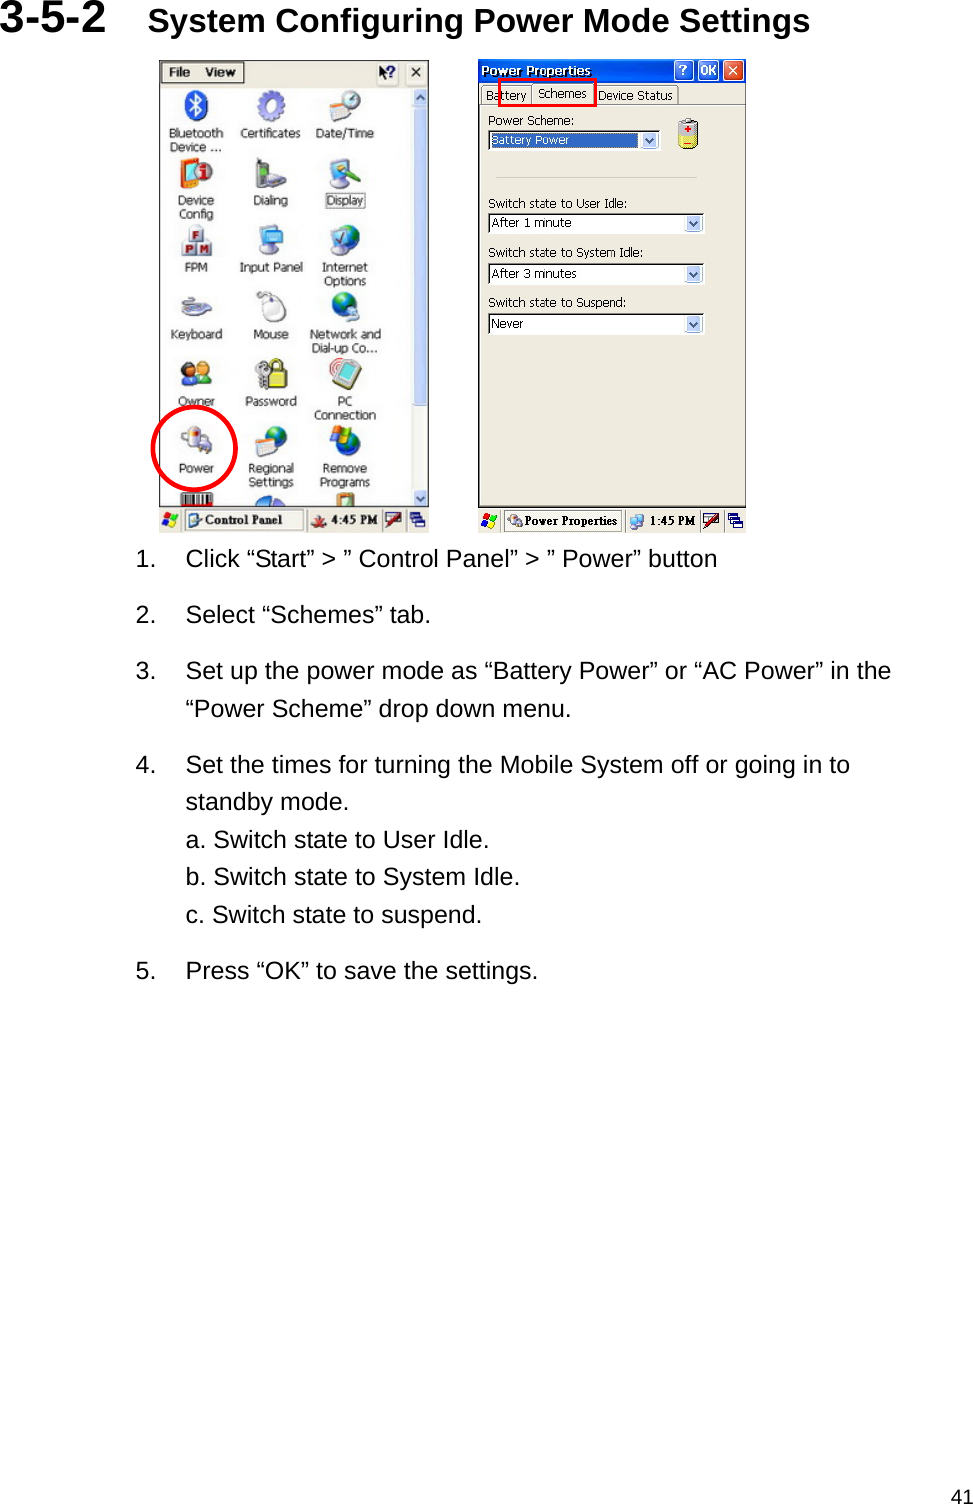   413-5-2  System Configuring Power Mode Settings       1.  Click “Start” &gt; ” Control Panel” &gt; ” Power” button 2.  Select “Schemes” tab. 3.  Set up the power mode as “Battery Power” or “AC Power” in the “Power Scheme” drop down menu. 4.  Set the times for turning the Mobile System off or going in to standby mode. a. Switch state to User Idle. b. Switch state to System Idle. c. Switch state to suspend. 5.  Press “OK” to save the settings.    